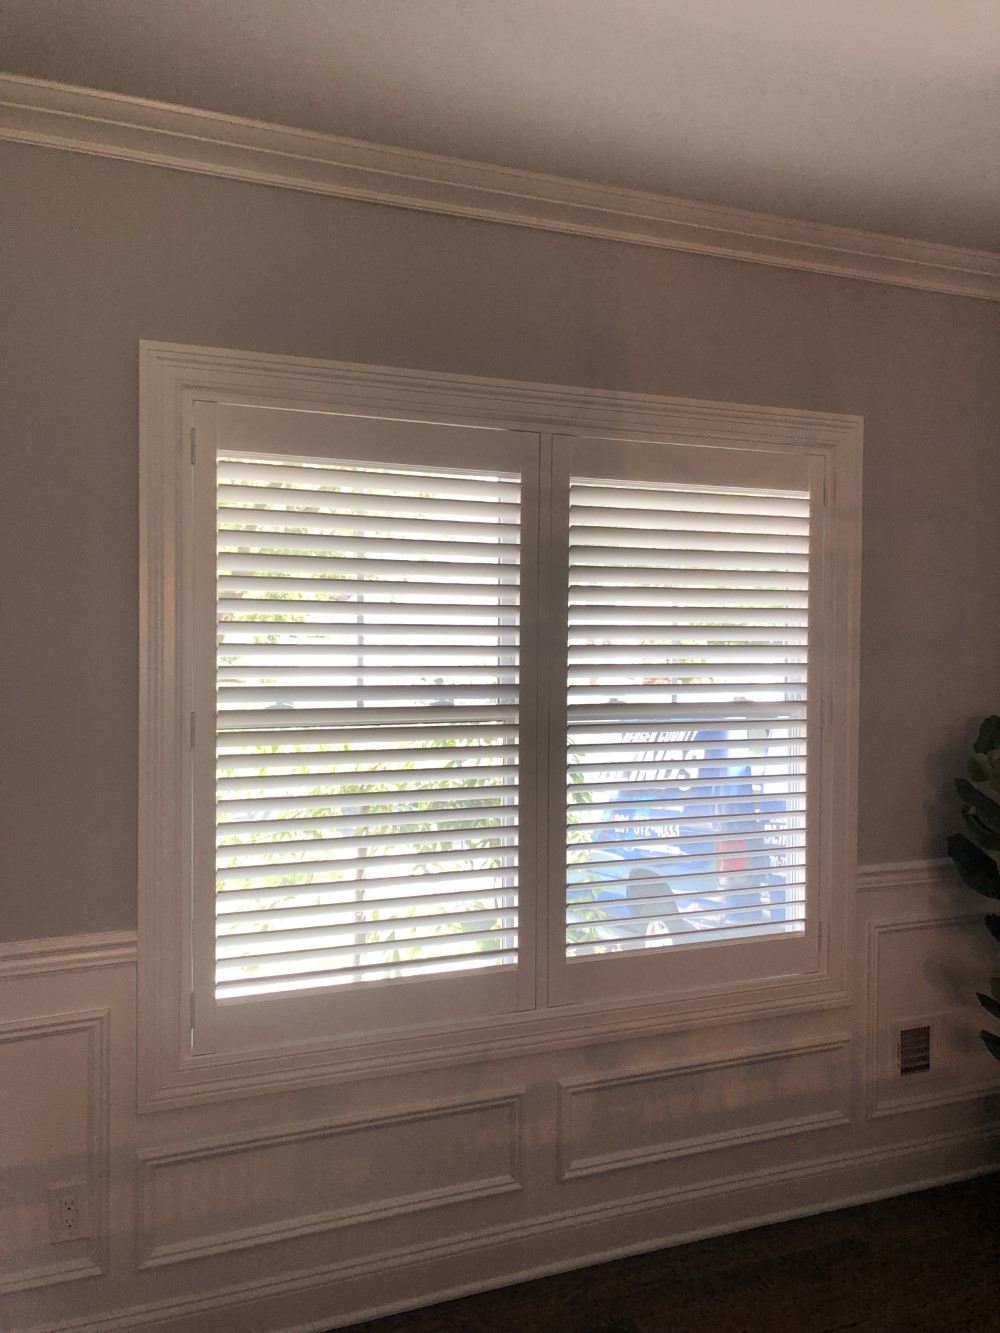 Hd Louvered Plantation Shutters In Oradell Nj Latest Projects